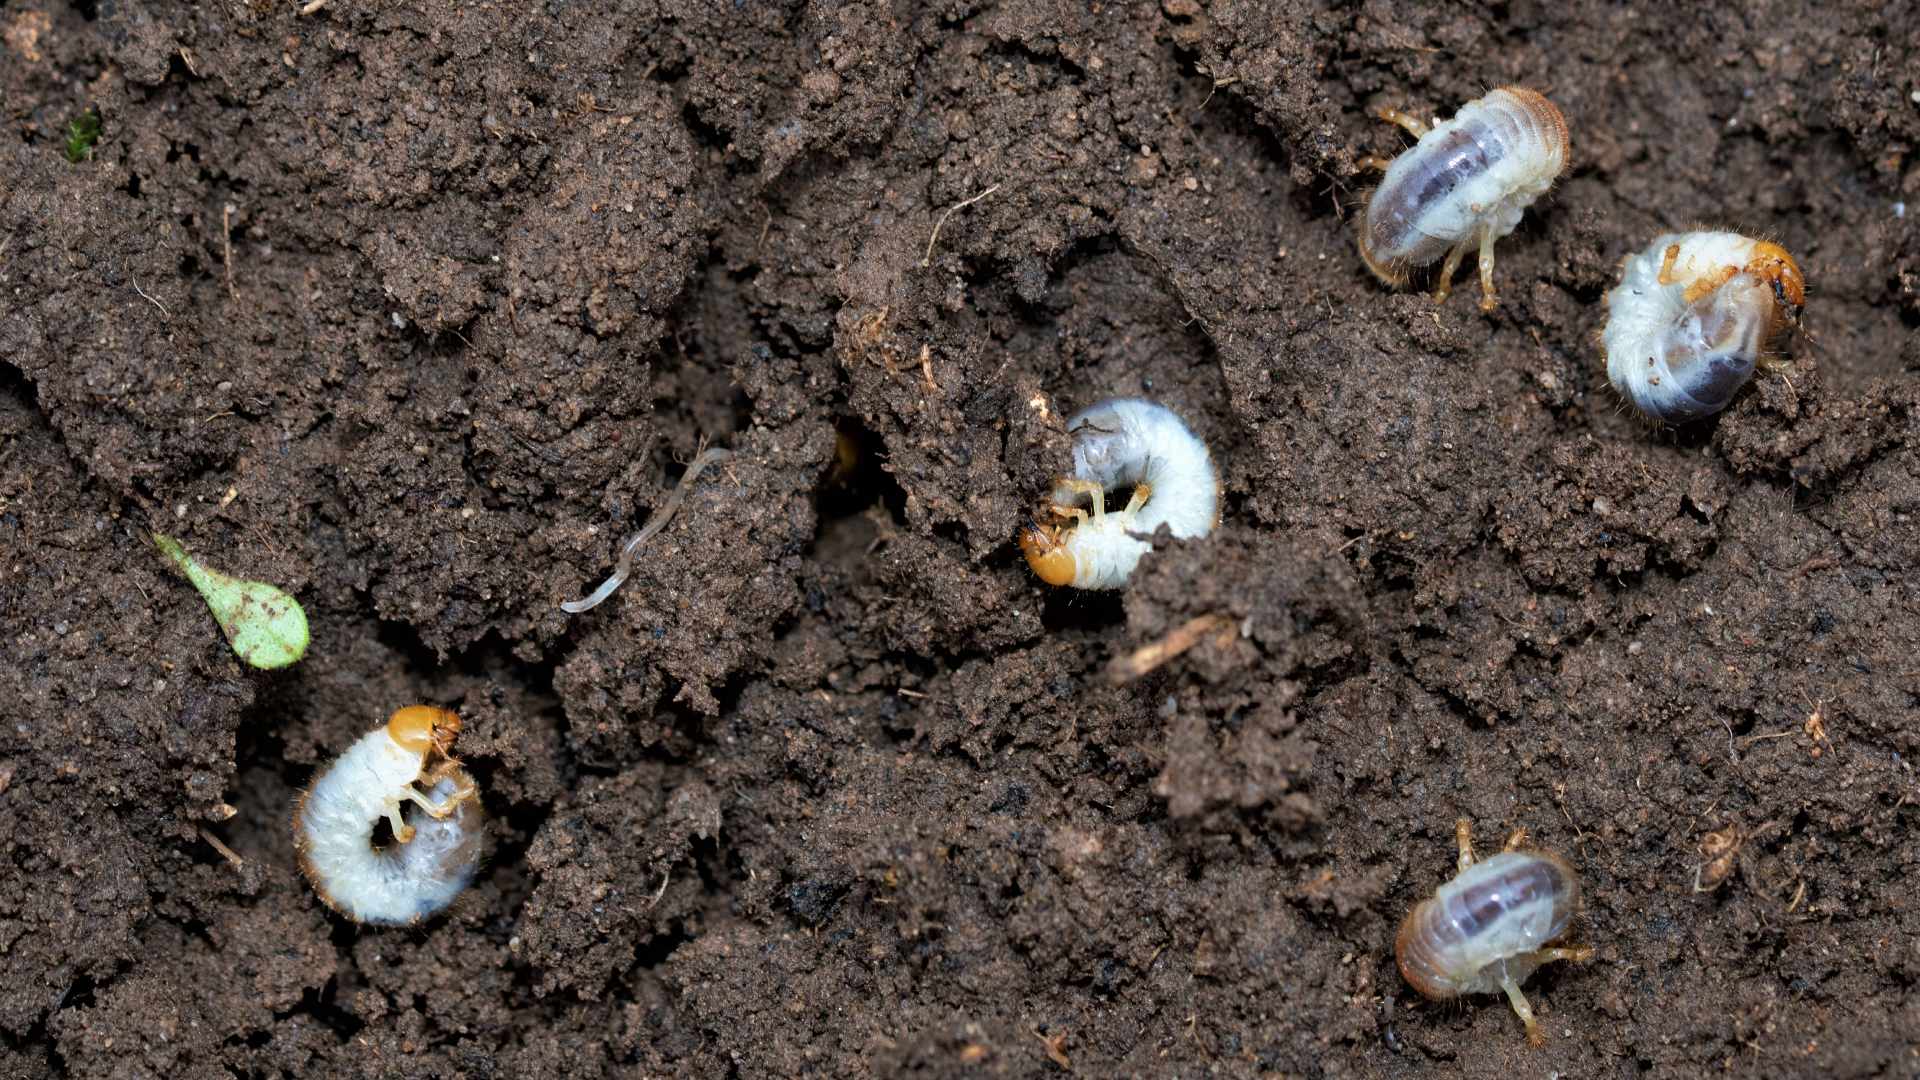 Grub infested soil found in client's lawn in Waukee, IA.